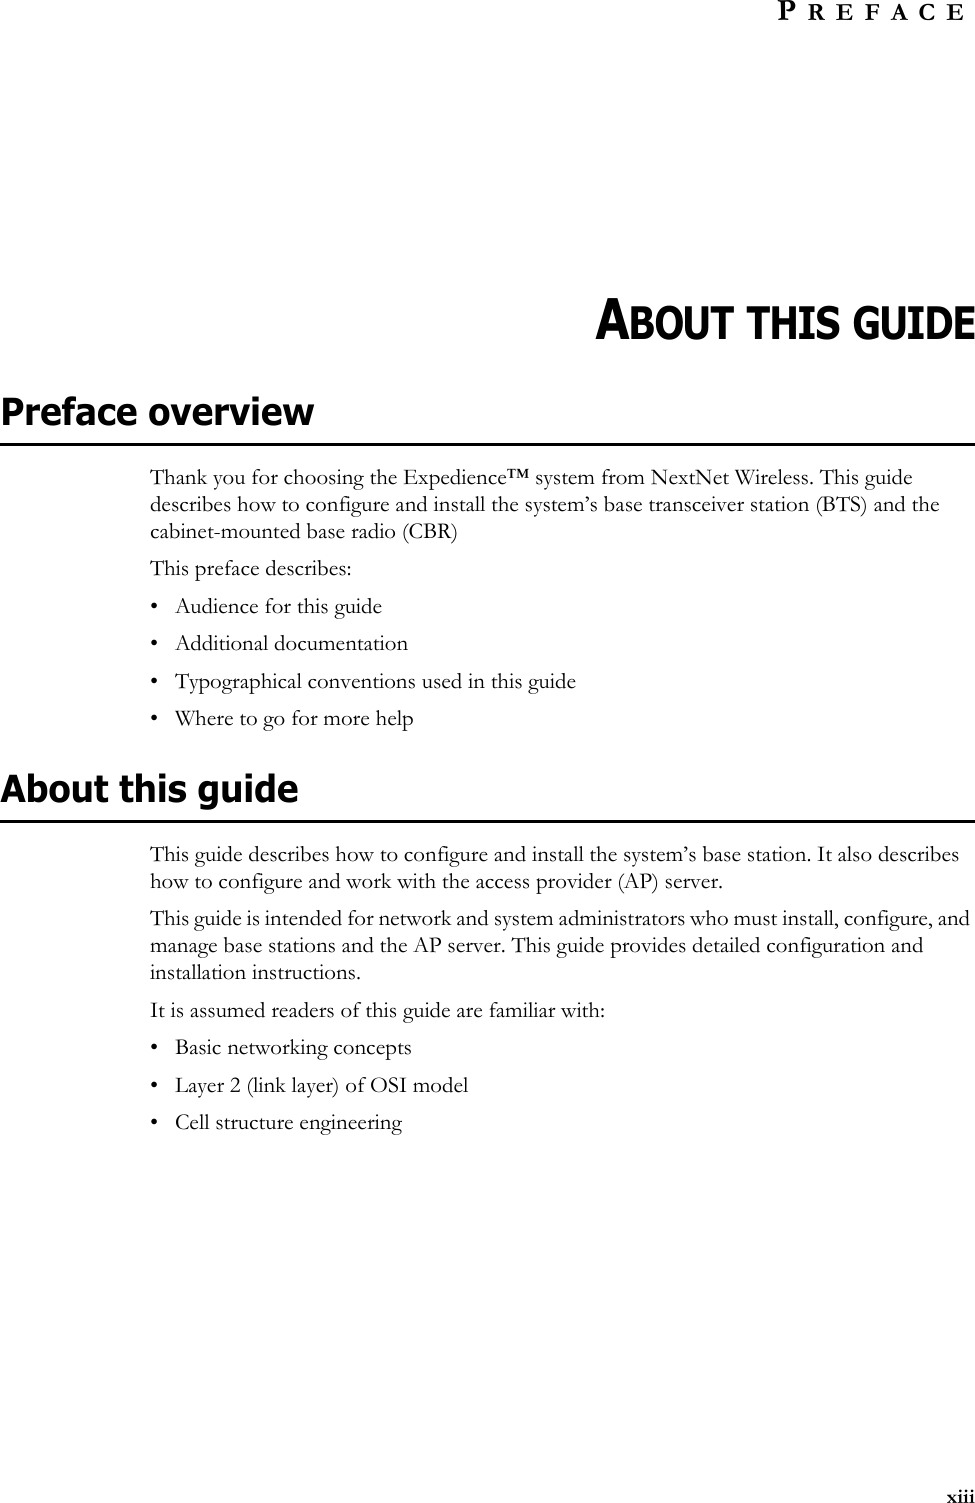 xiiiPREFACEABOUT THIS GUIDEPreface overviewThank you for choosing the Expedience™ system from NextNet Wireless. This guide describes how to configure and install the system’s base transceiver station (BTS) and the cabinet-mounted base radio (CBR) This preface describes:• Audience for this guide• Additional documentation• Typographical conventions used in this guide• Where to go for more helpAbout this guideThis guide describes how to configure and install the system’s base station. It also describes how to configure and work with the access provider (AP) server.This guide is intended for network and system administrators who must install, configure, and manage base stations and the AP server. This guide provides detailed configuration and installation instructions.It is assumed readers of this guide are familiar with:• Basic networking concepts• Layer 2 (link layer) of OSI model • Cell structure engineering